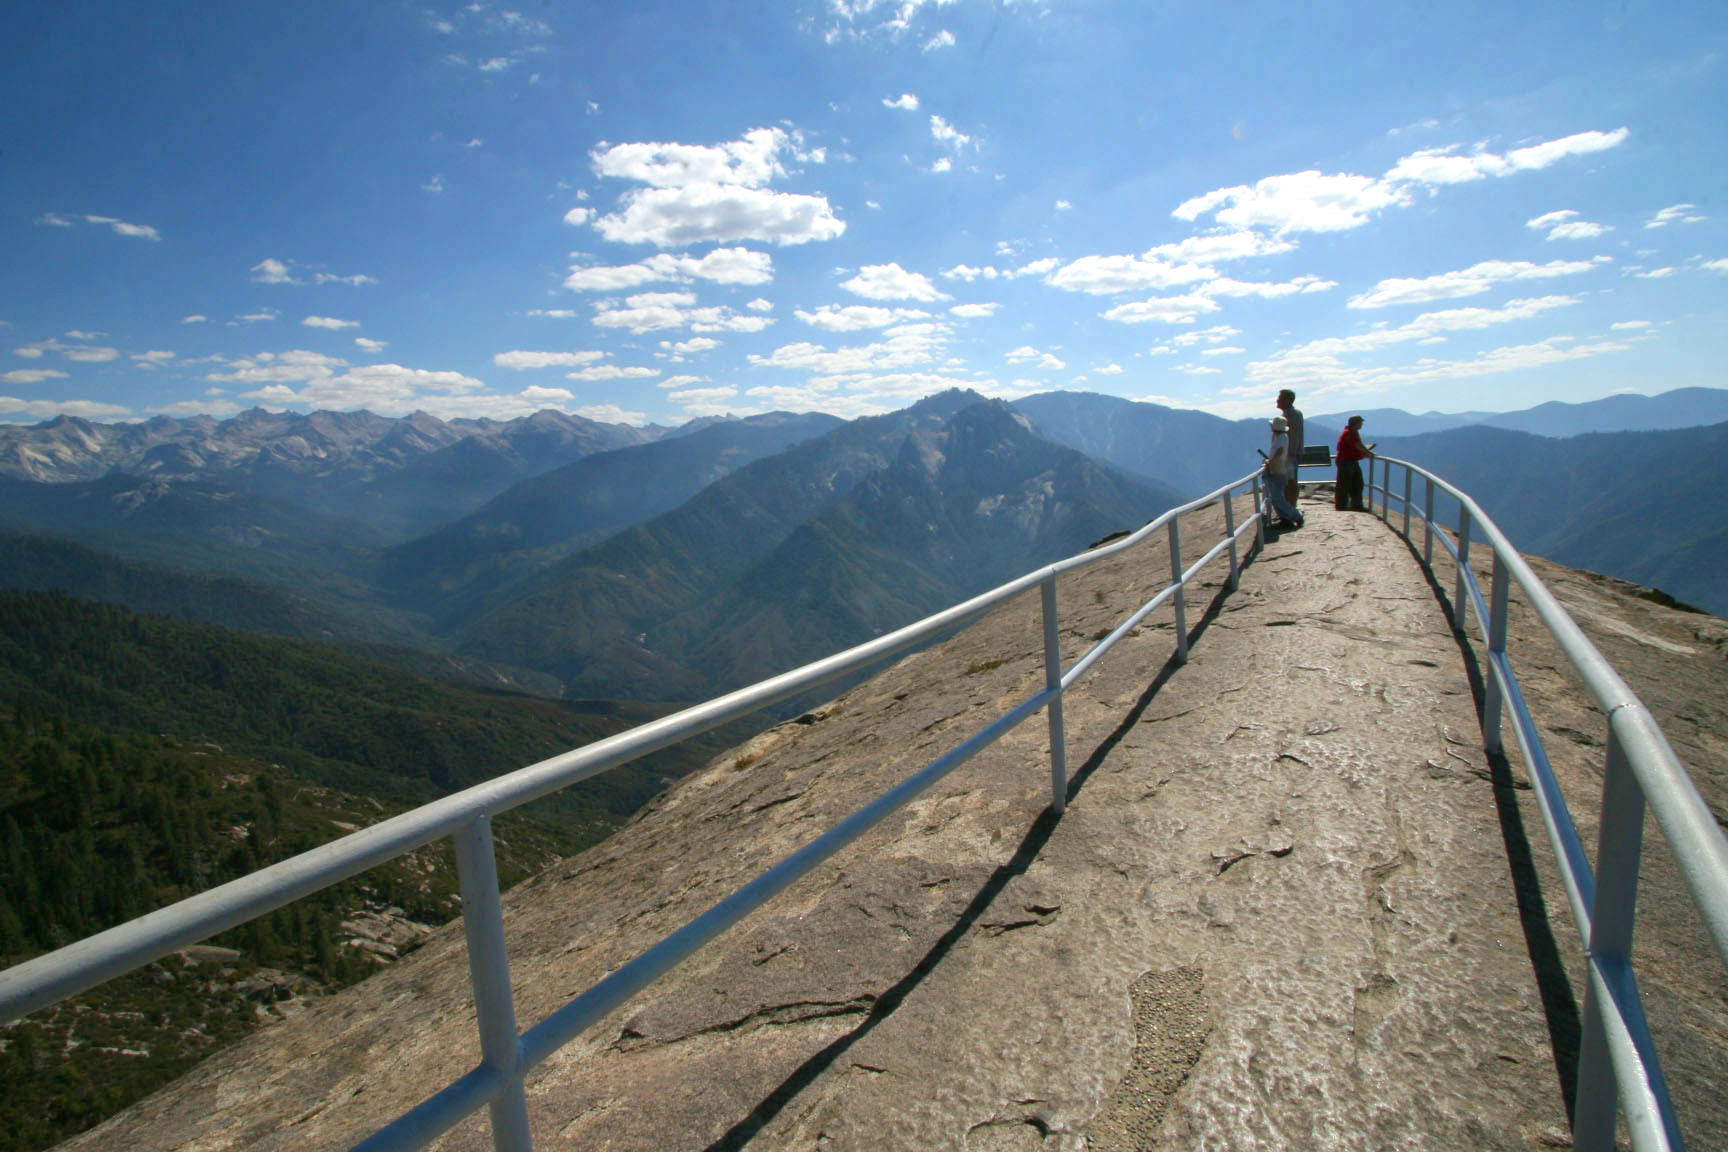 Moro Rock trail offers expansive views